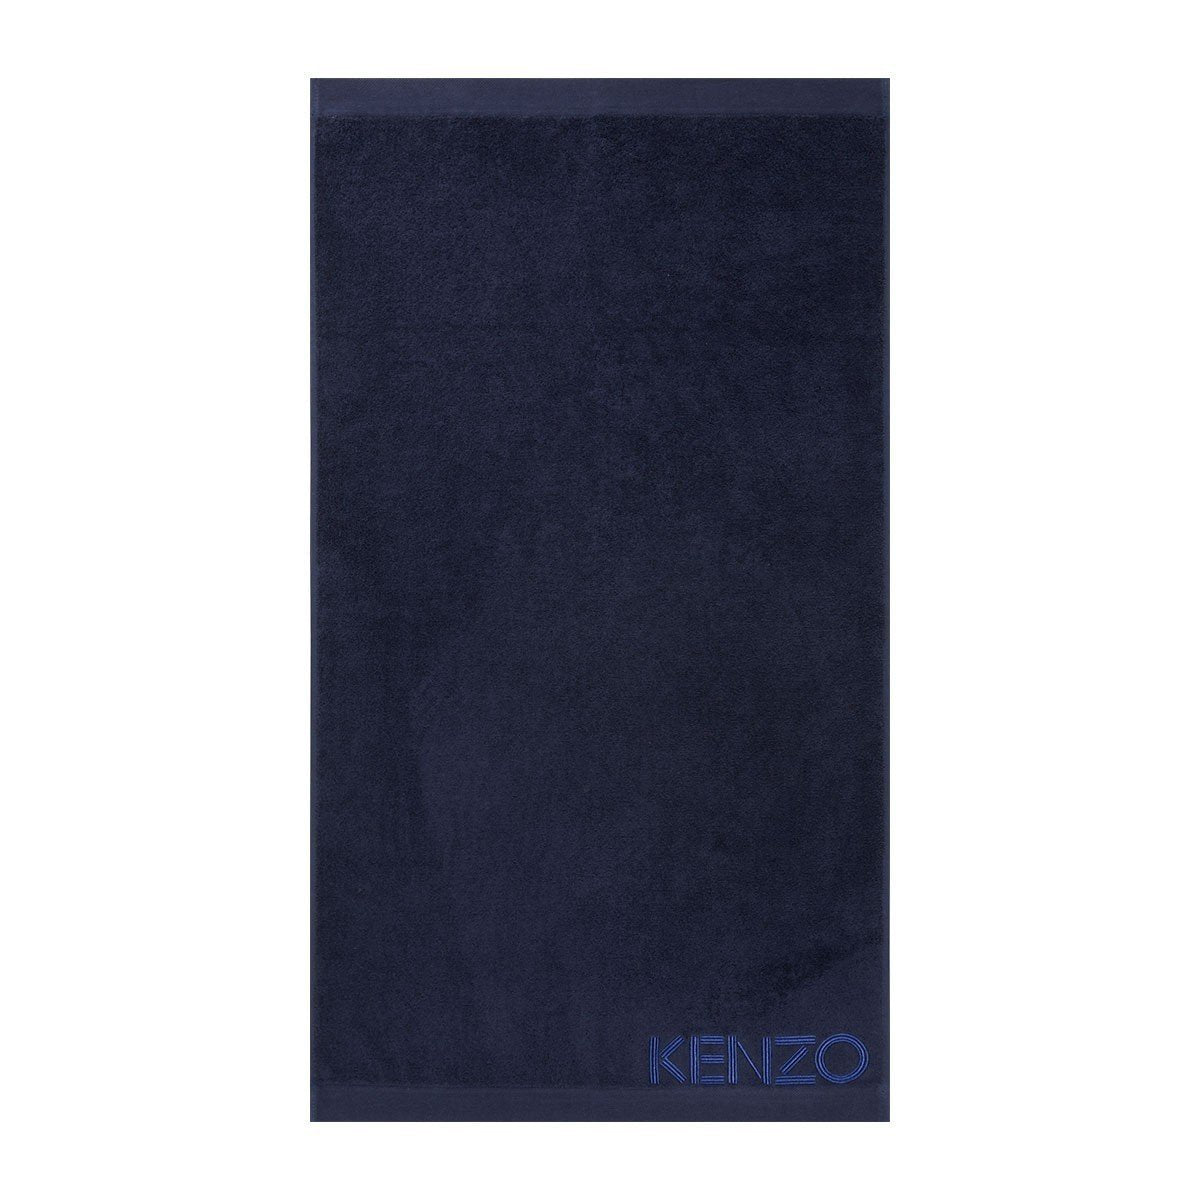 Iconic Navy Blue Bath Sheet by Kenzo | Fig Linens